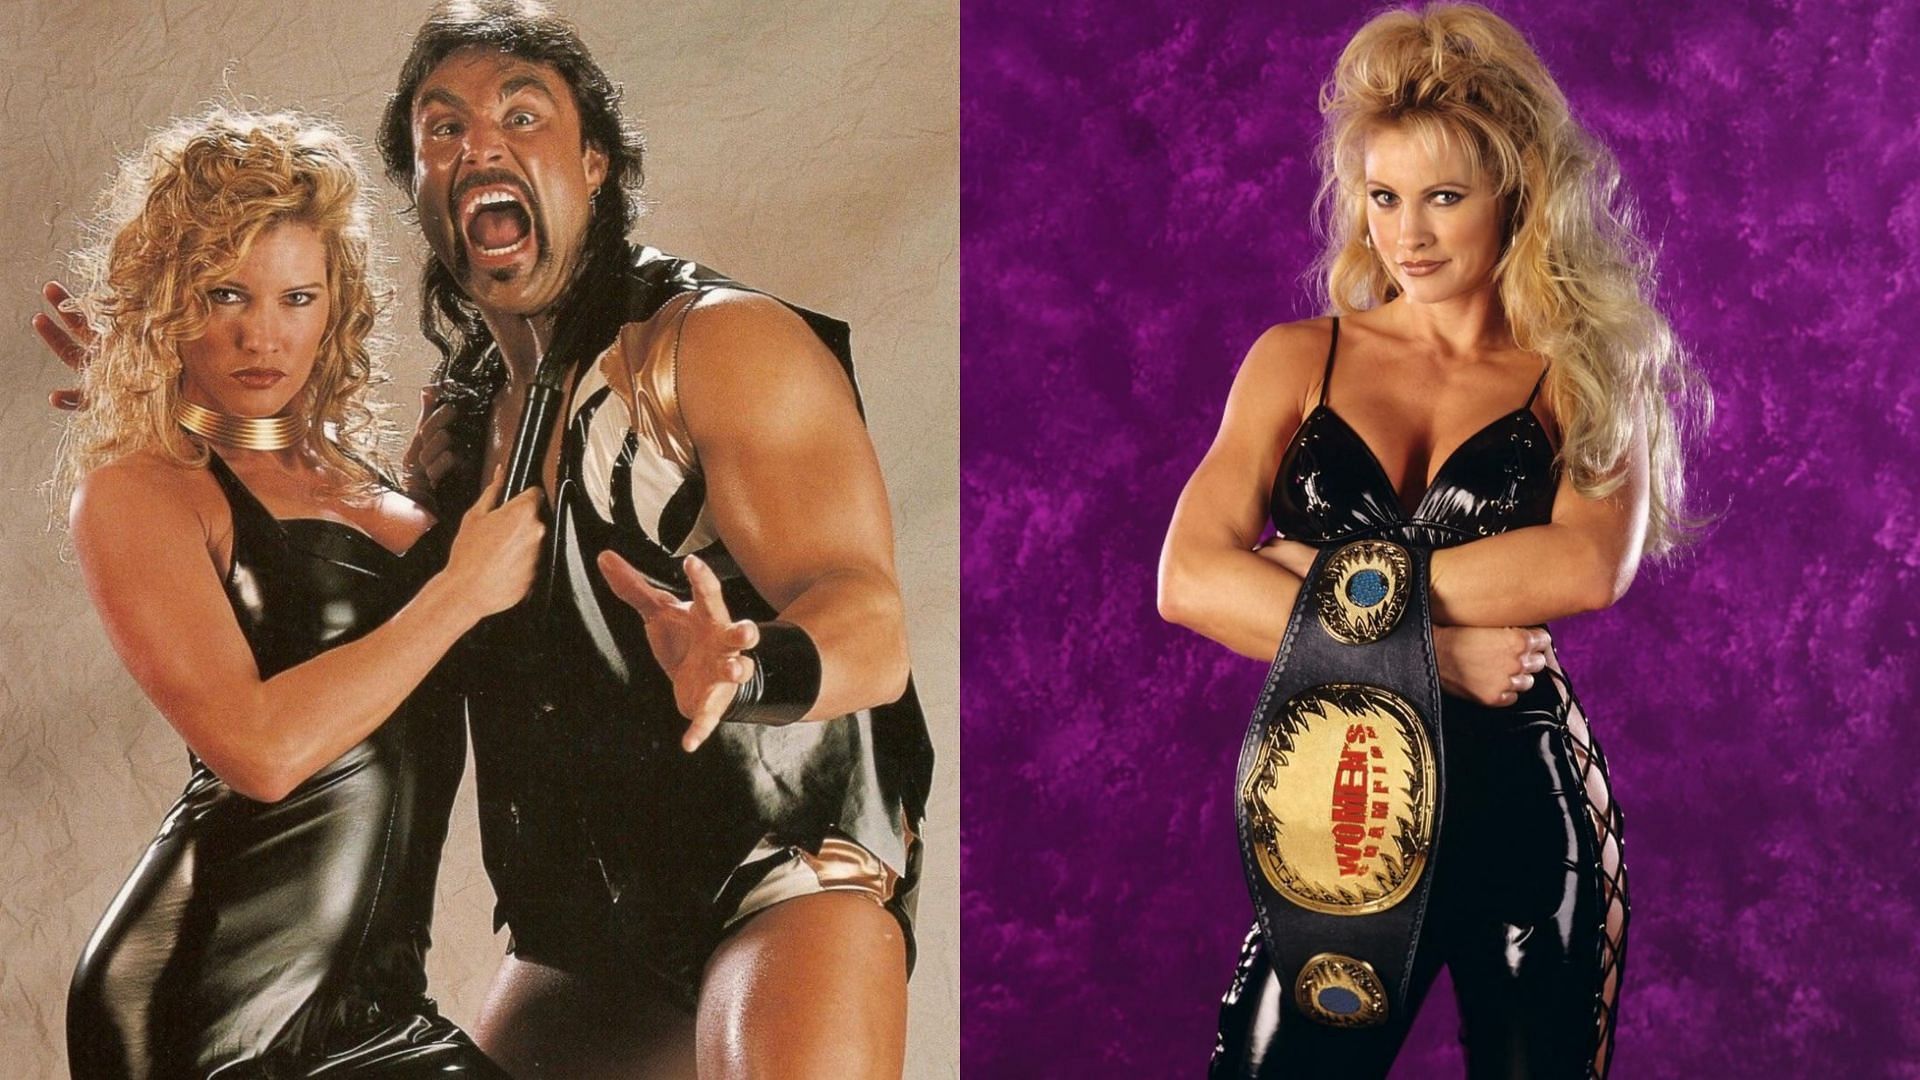 Sable was married to Marc Mero when she signed with WWE